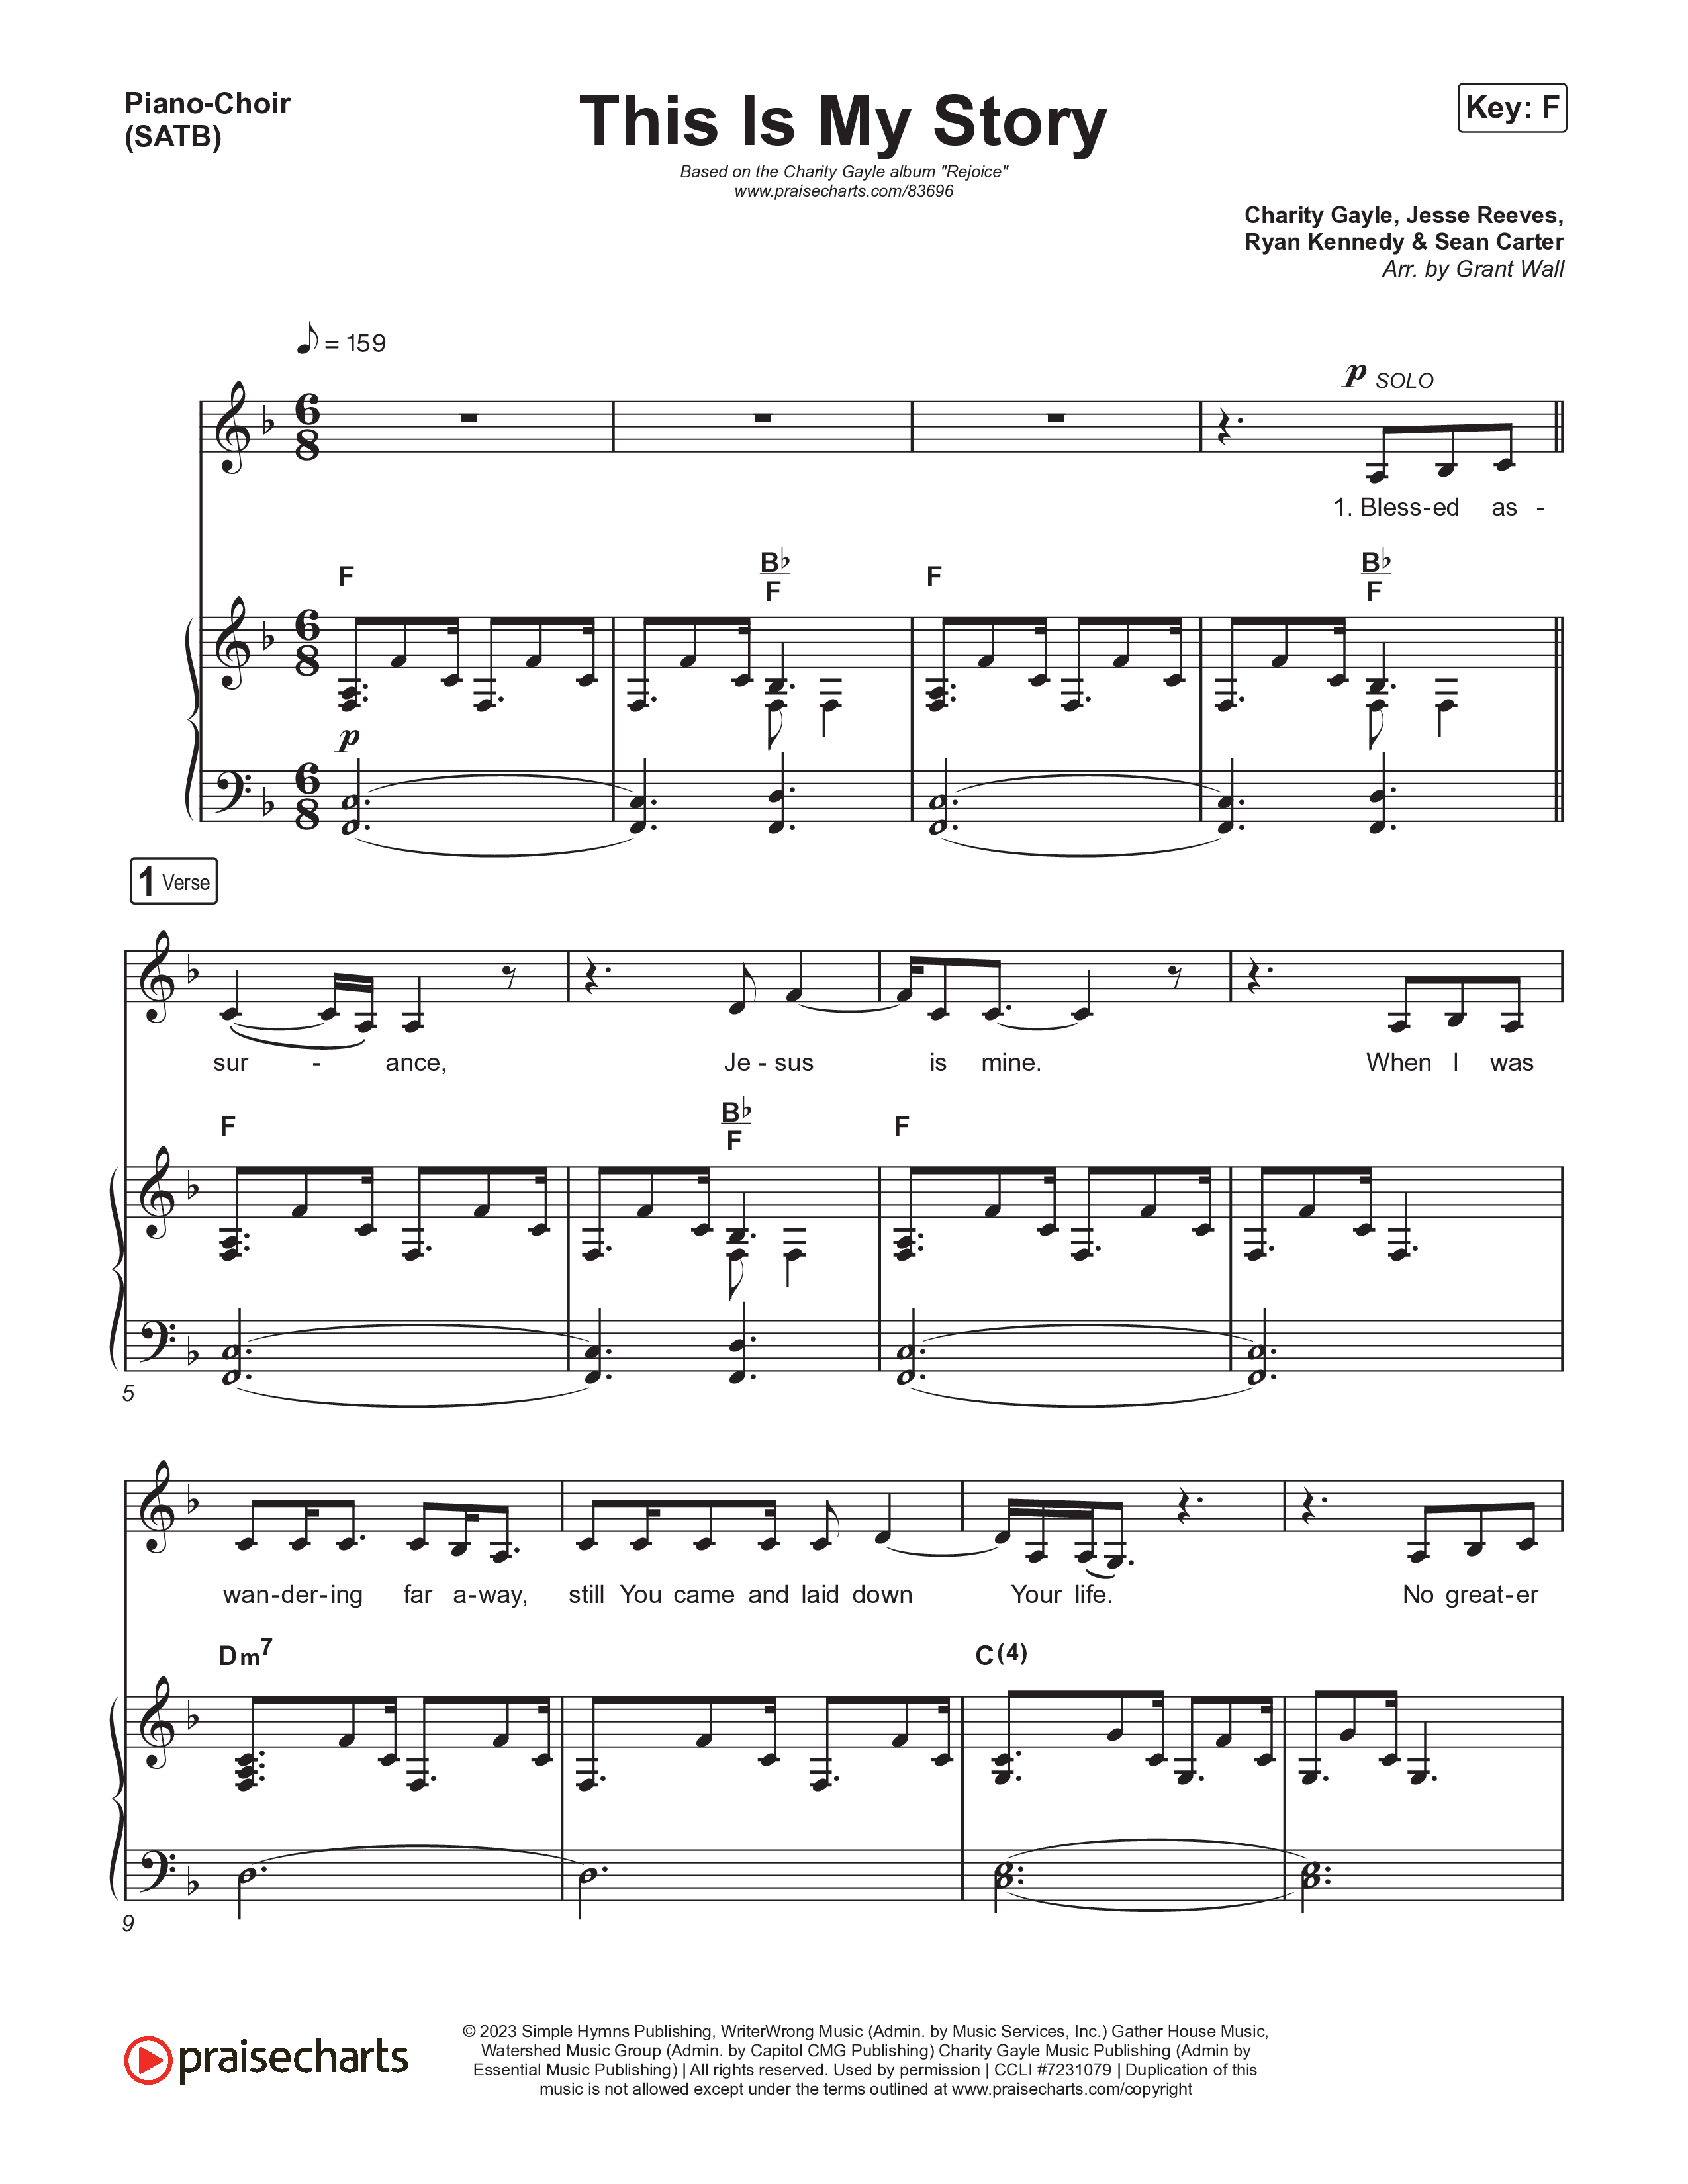 This Is My Story Piano/Vocal (SATB) (Charity Gayle)